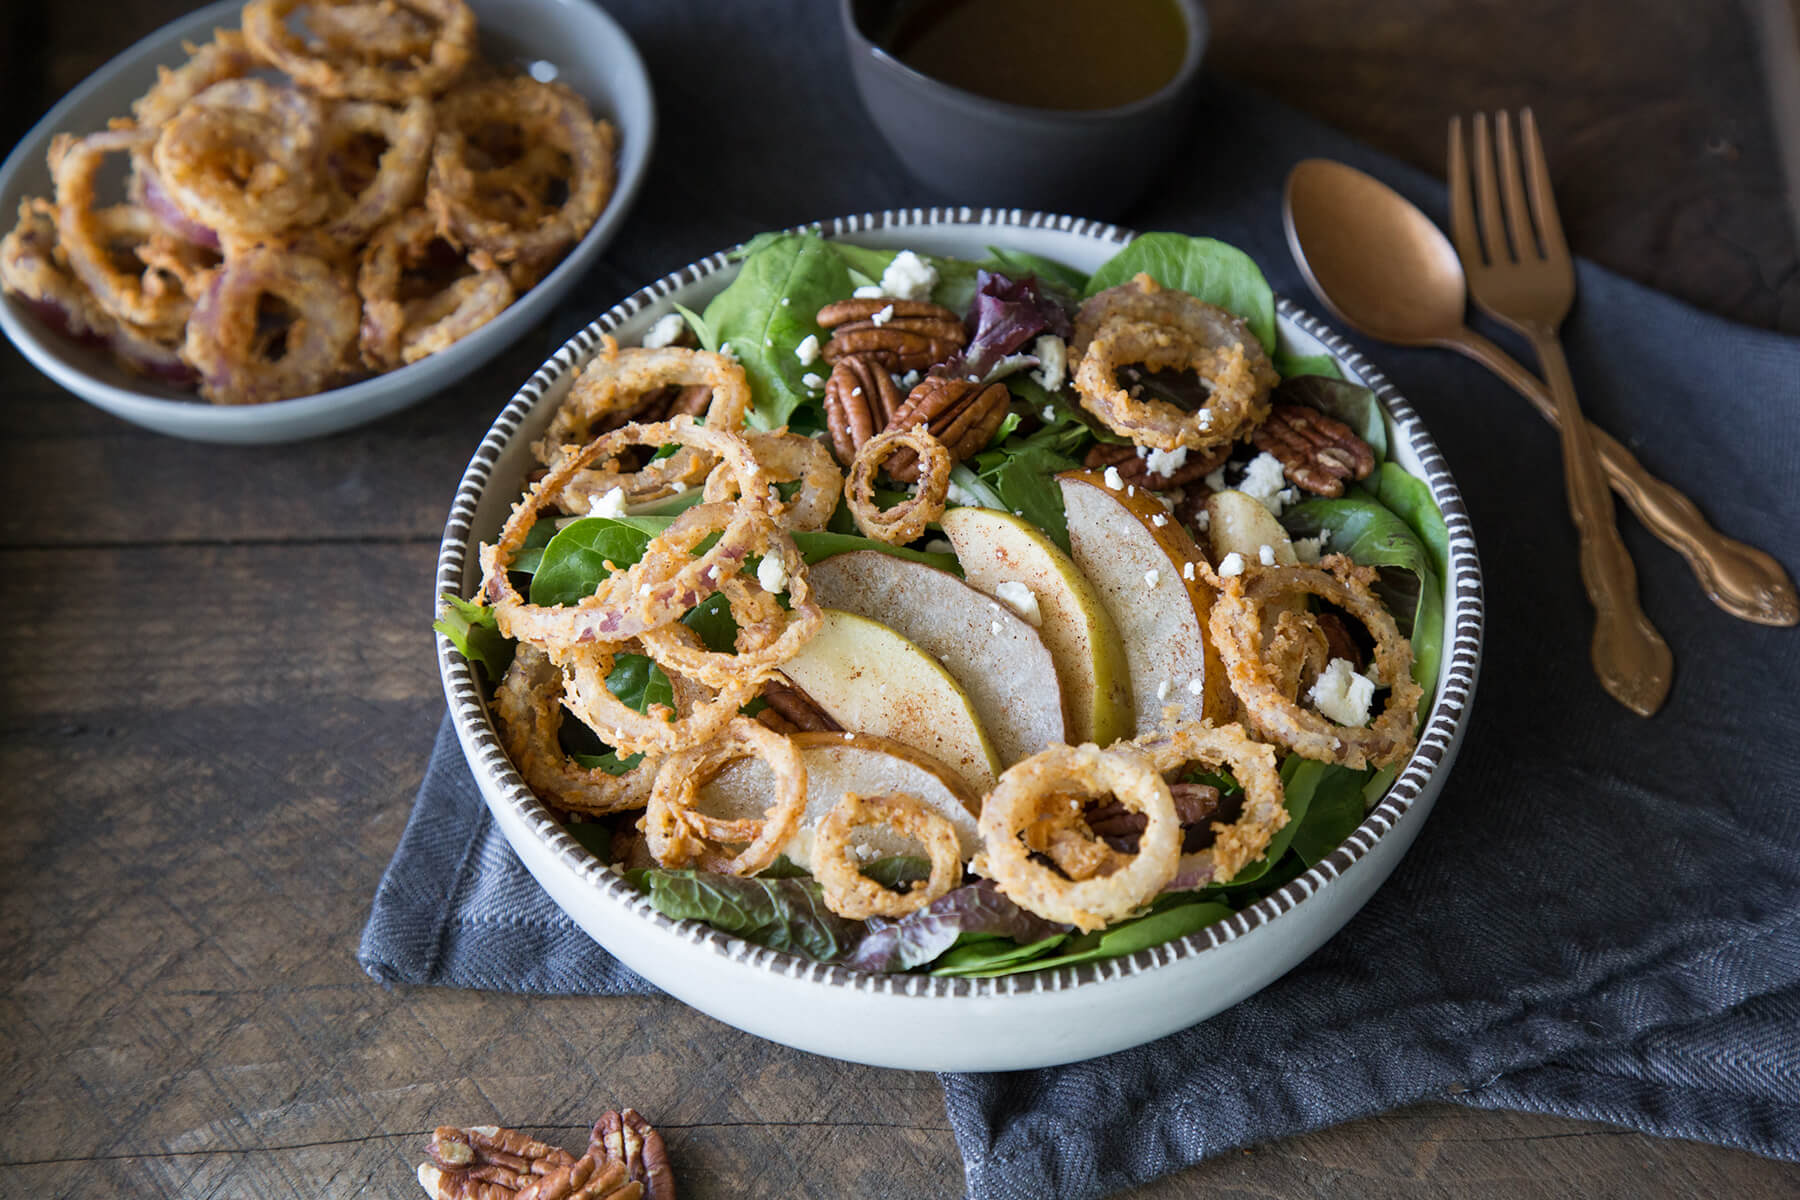 Mixed Greens with Frizzled Onions